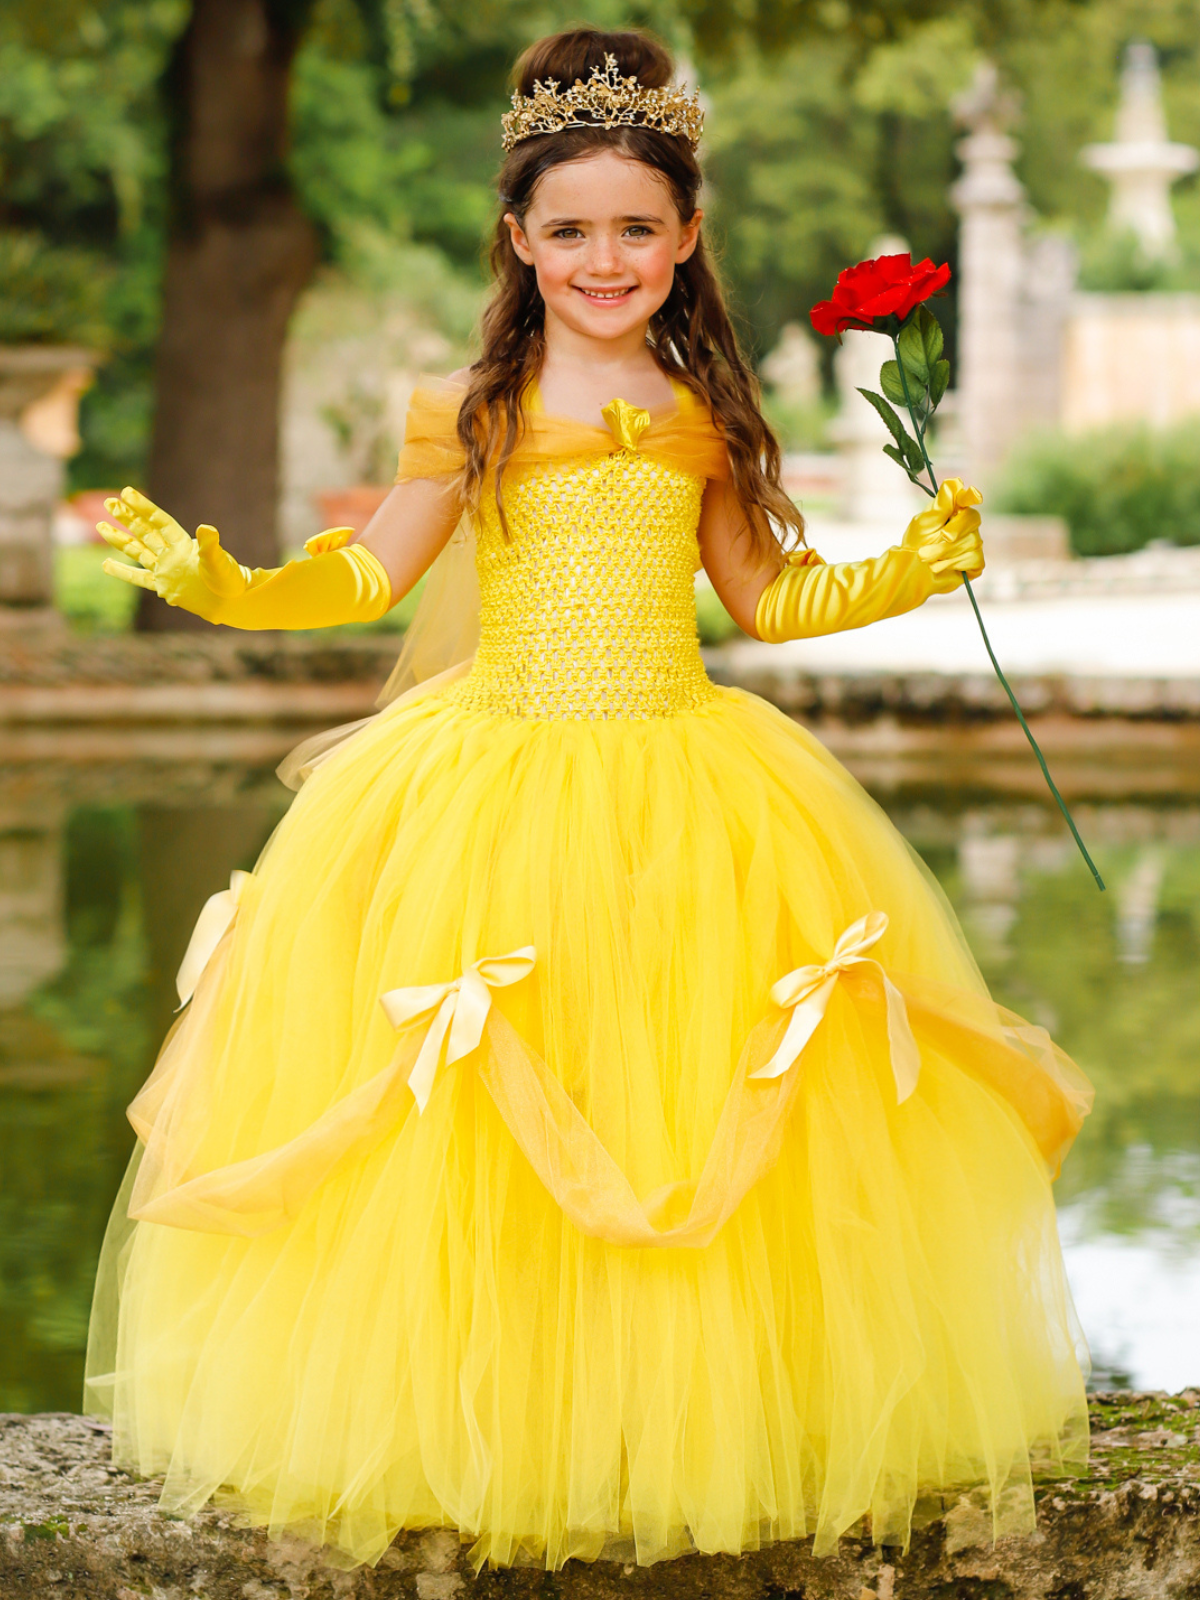 Sparkly Belle Costume Beauty and the Beast Disney Princess Costume - Etsy | Belle  costume, Princess ball gowns, Ball gowns